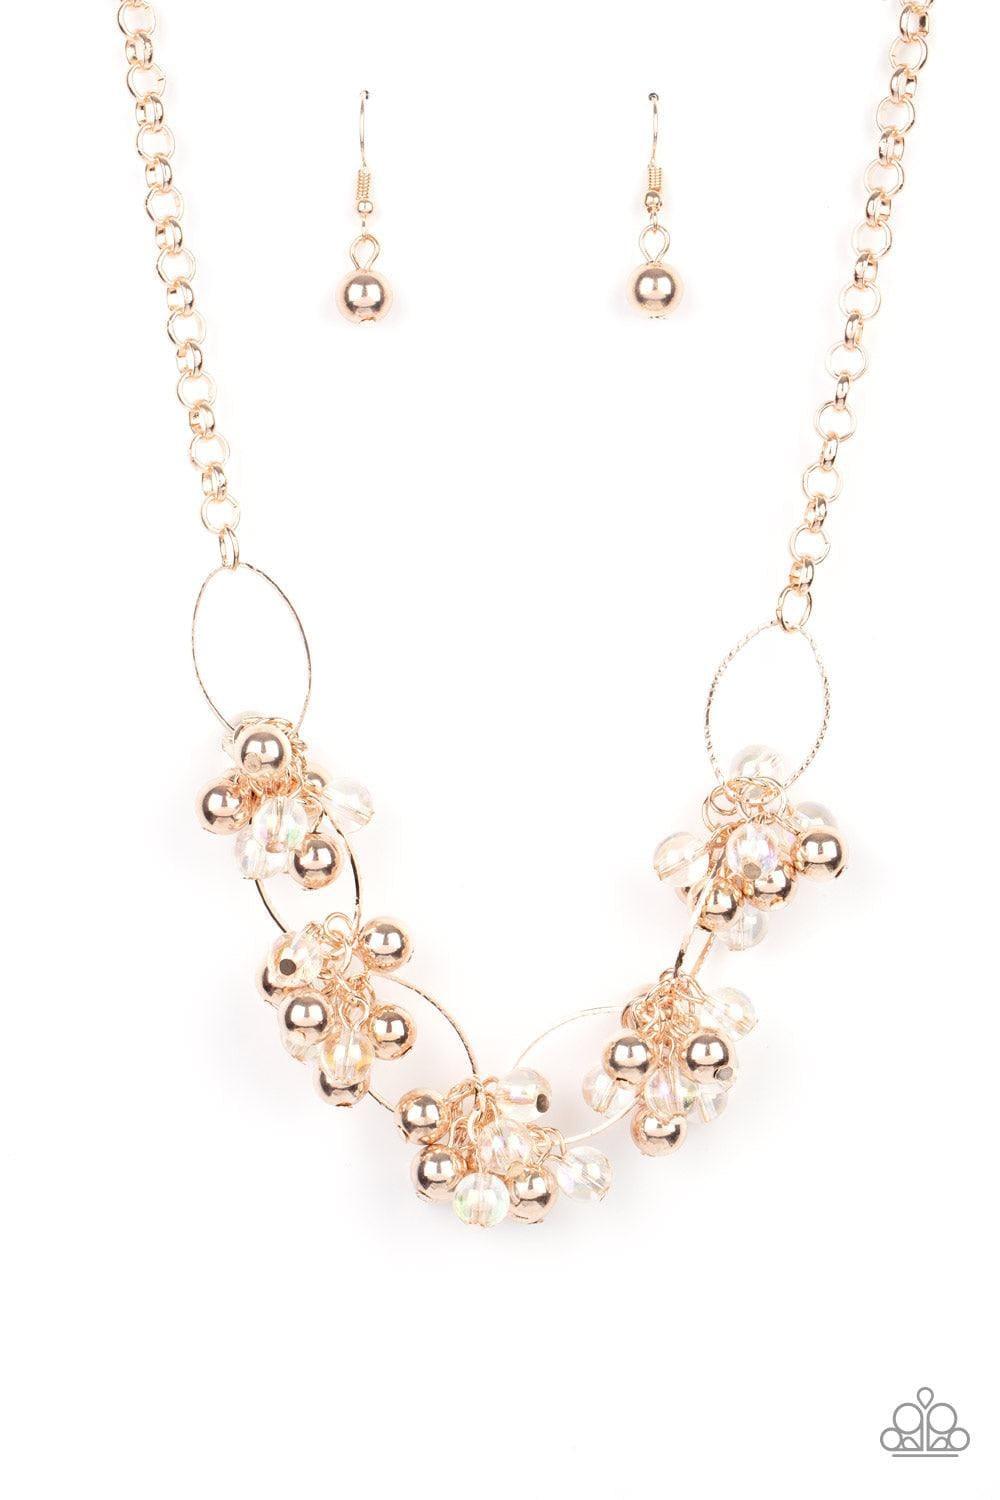 Paparazzi Accessories - Effervescent Ensemble - Rose Gold Necklace - Bling by JessieK